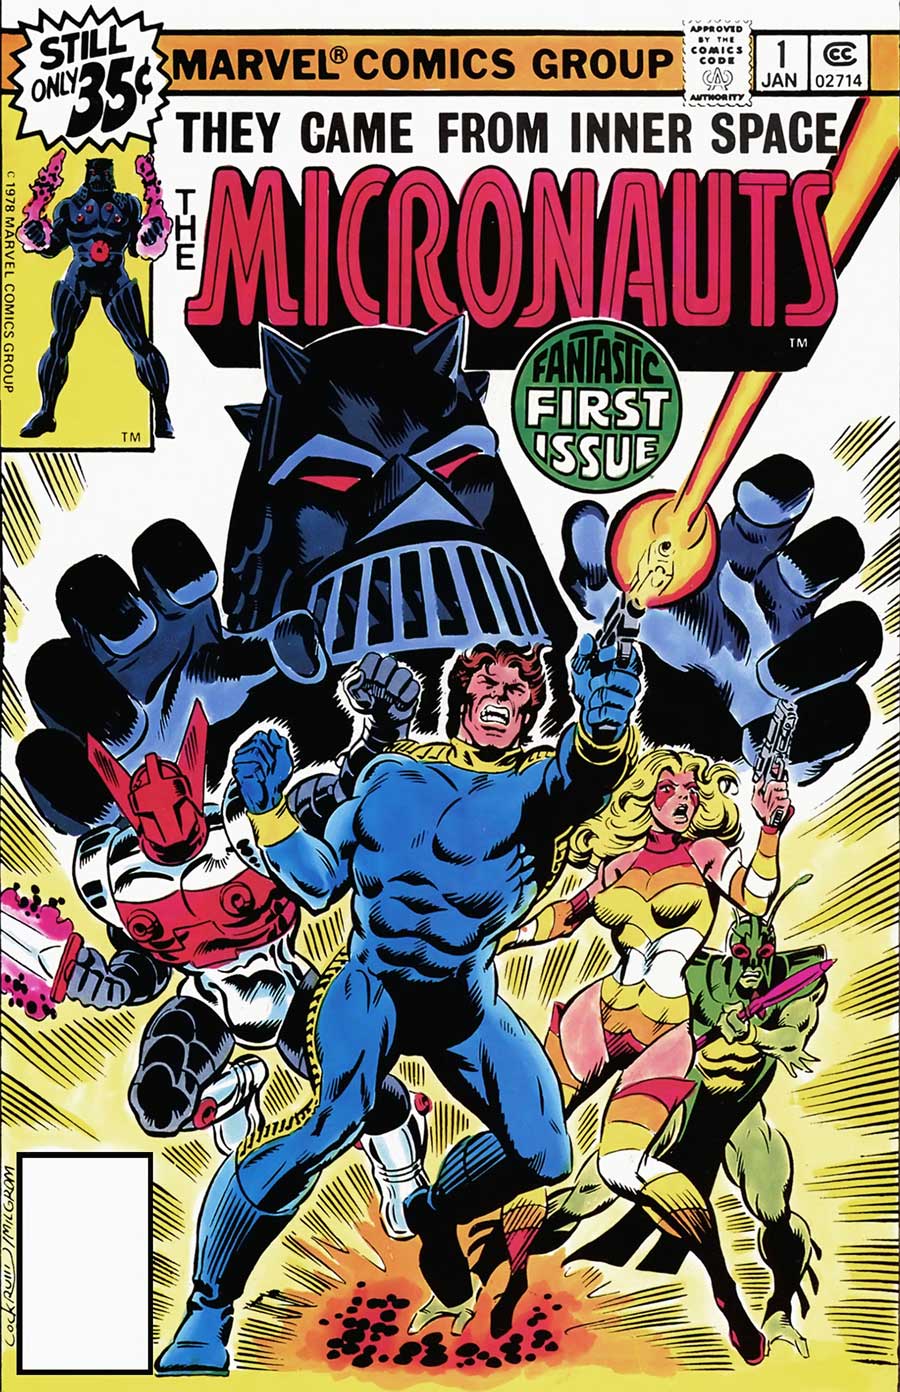 Micronauts #1 by Bill Mantlo and Michael Golden